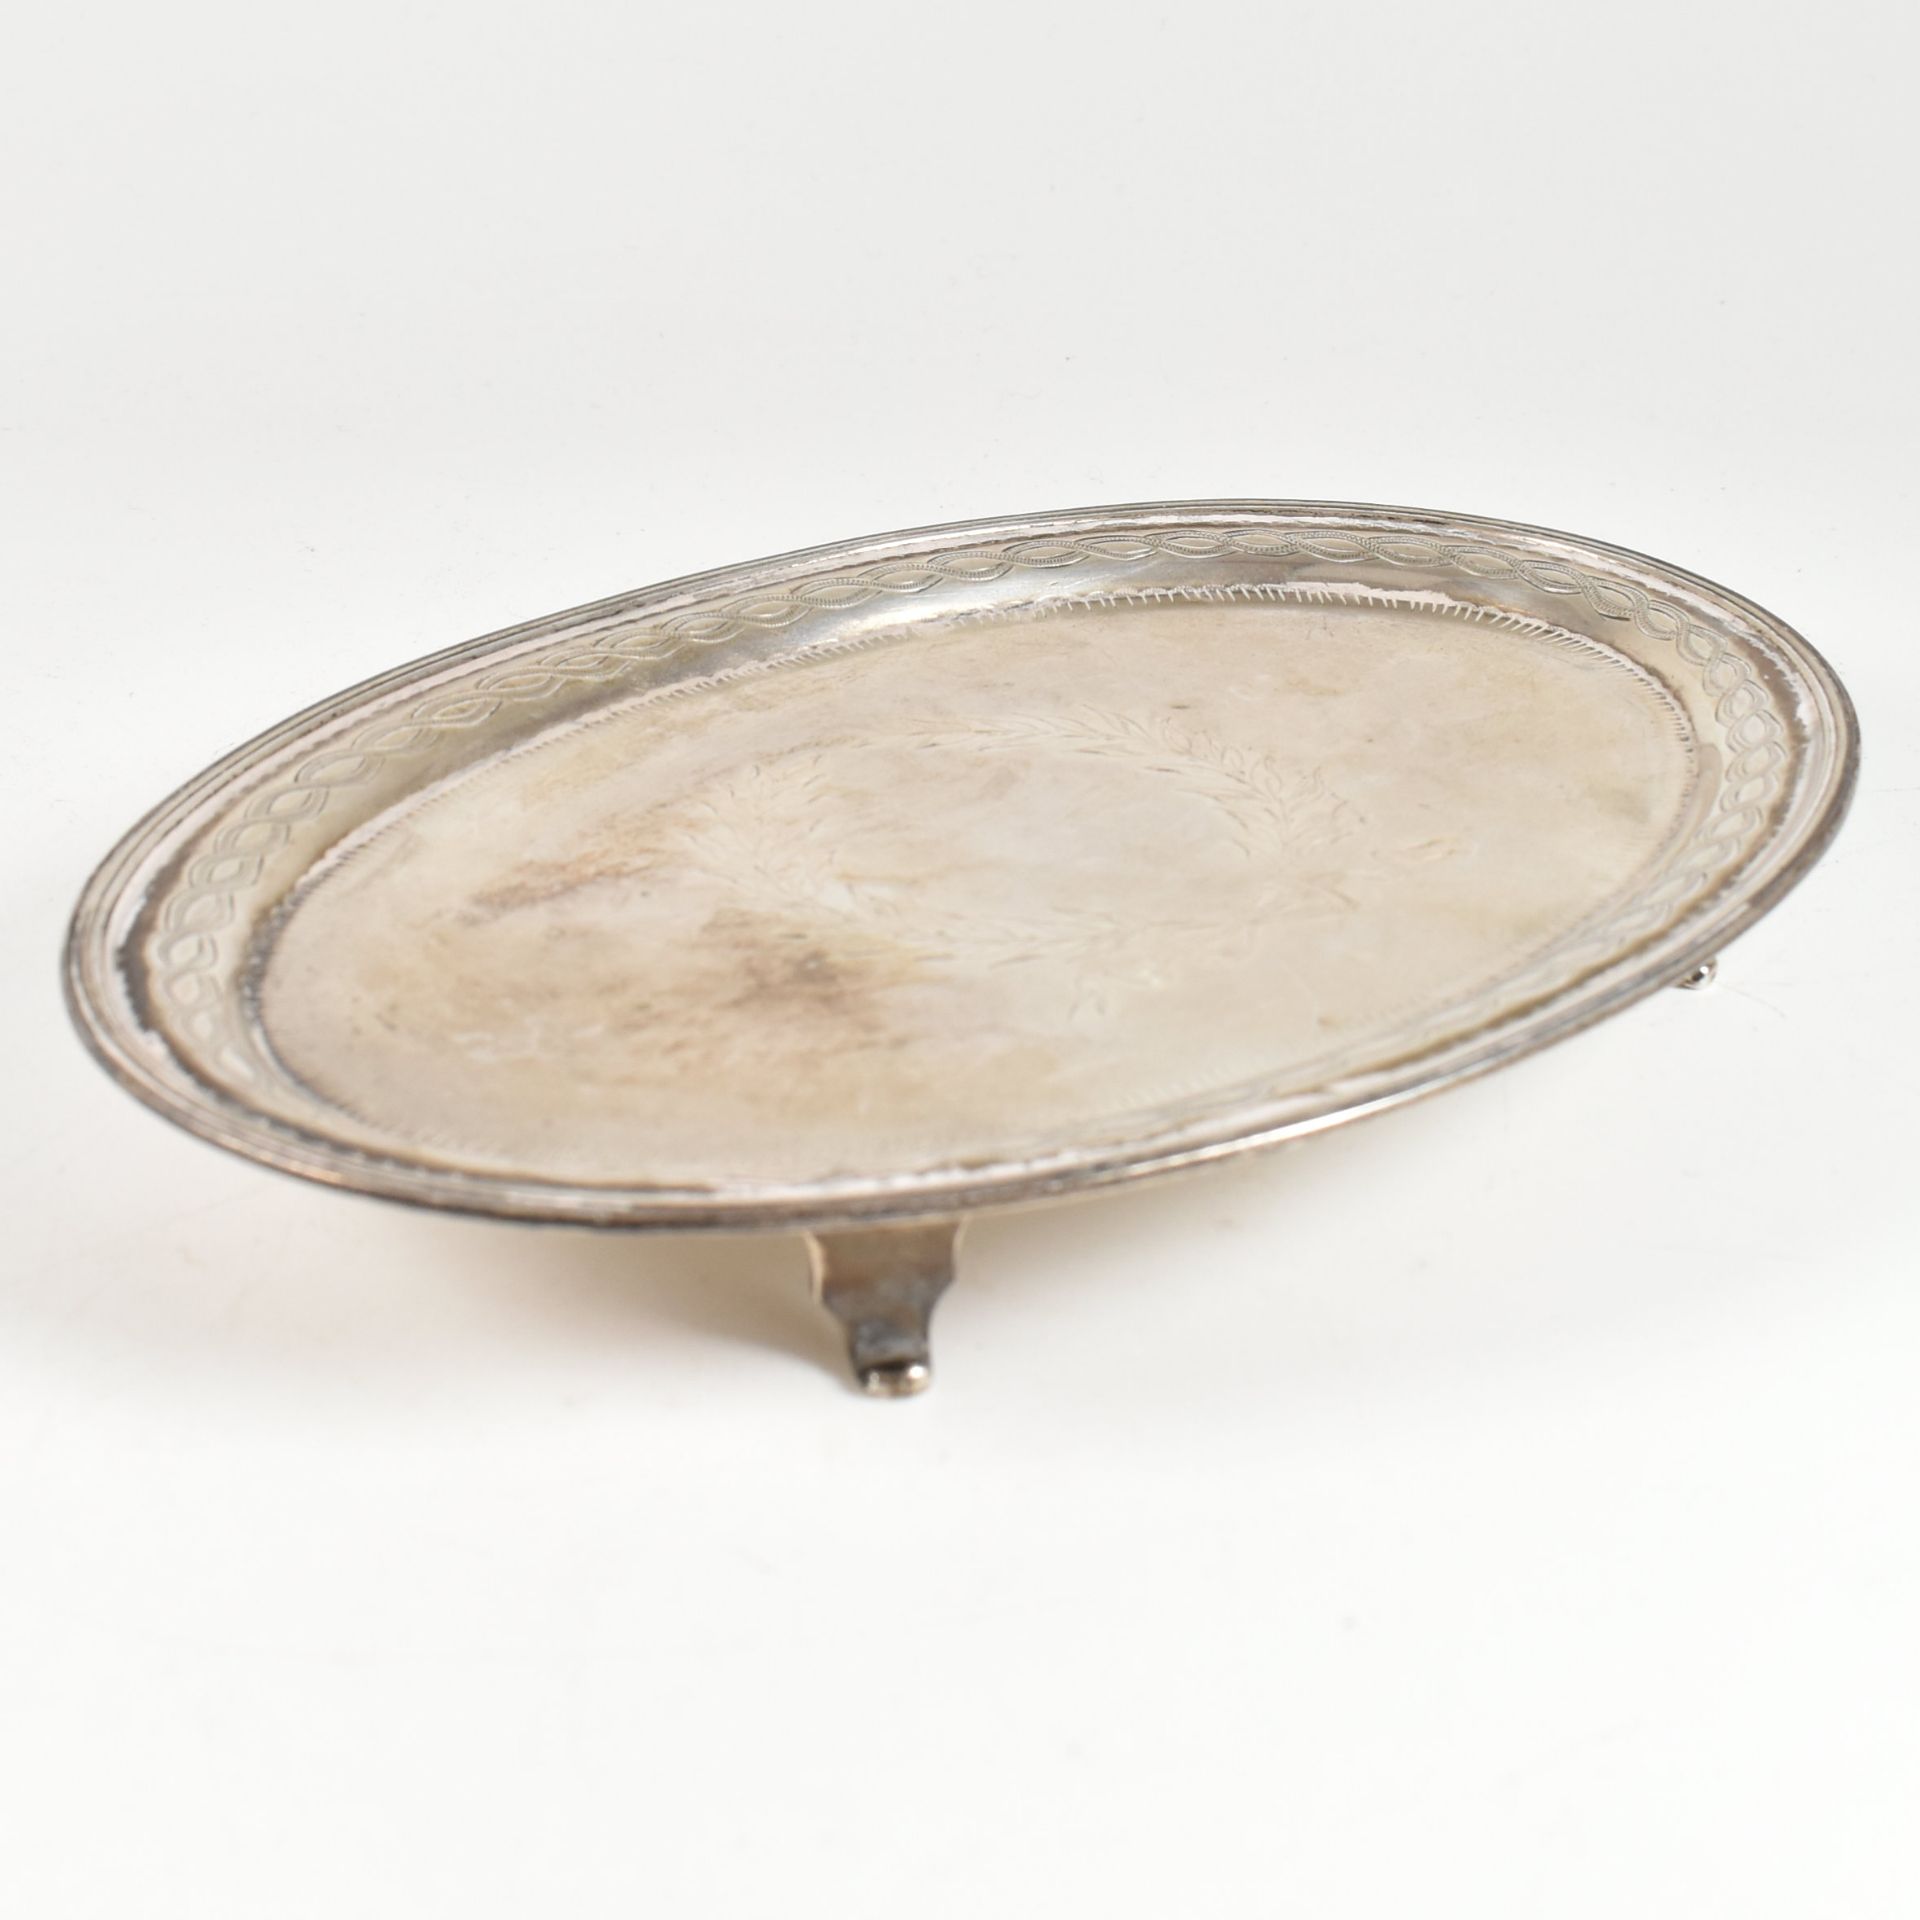 GEORGE V HALLMARKED SILVER TRAY - Image 7 of 8